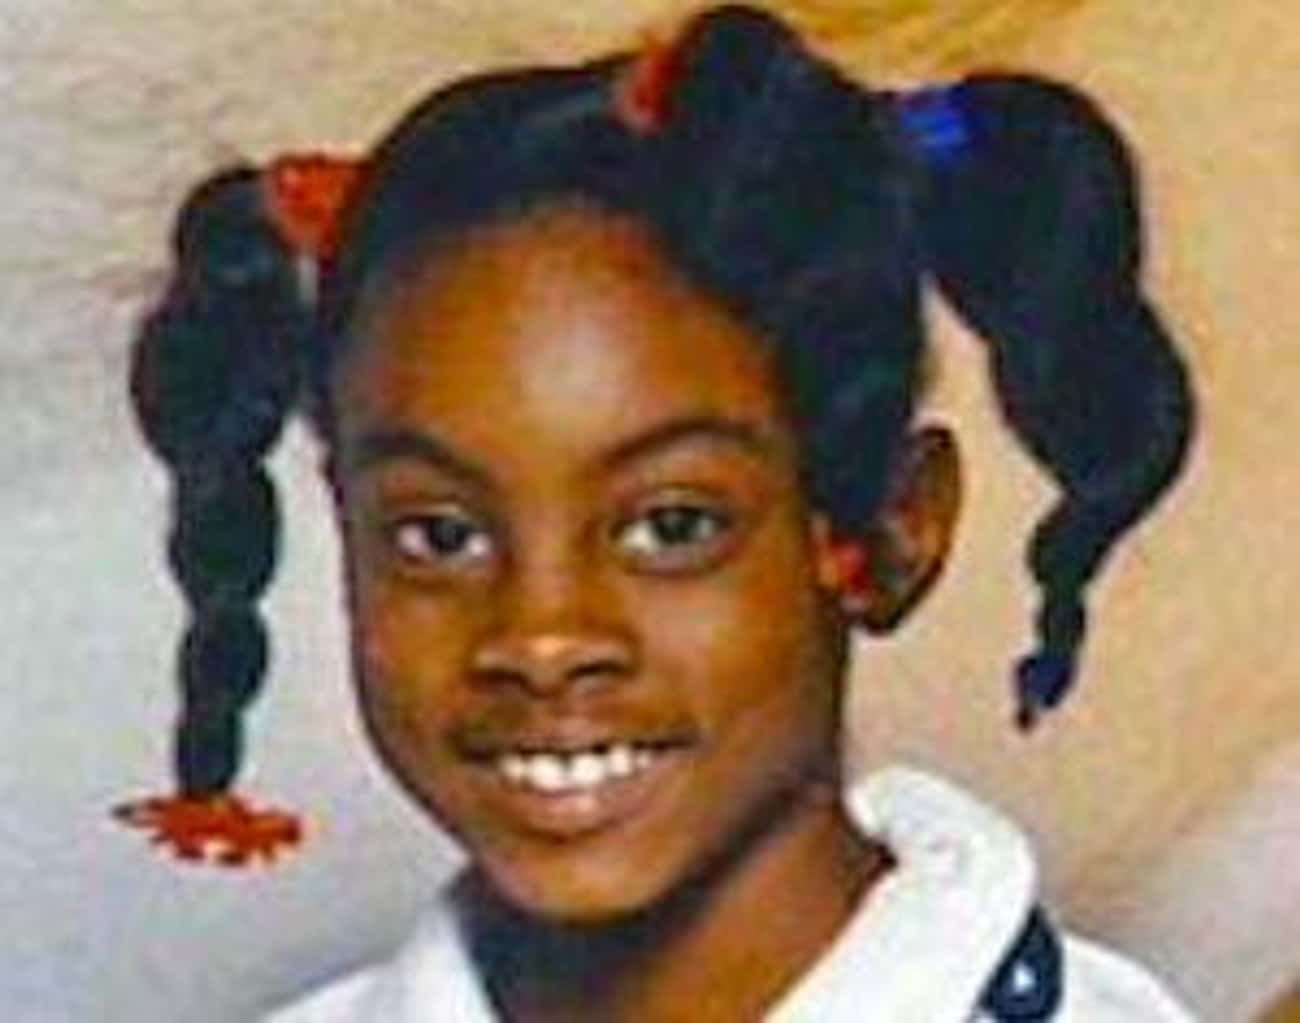 On Valentine's Day 2000, 9-Year-Old Asha Degree Disappeared From Her Shelby, NC, Home 